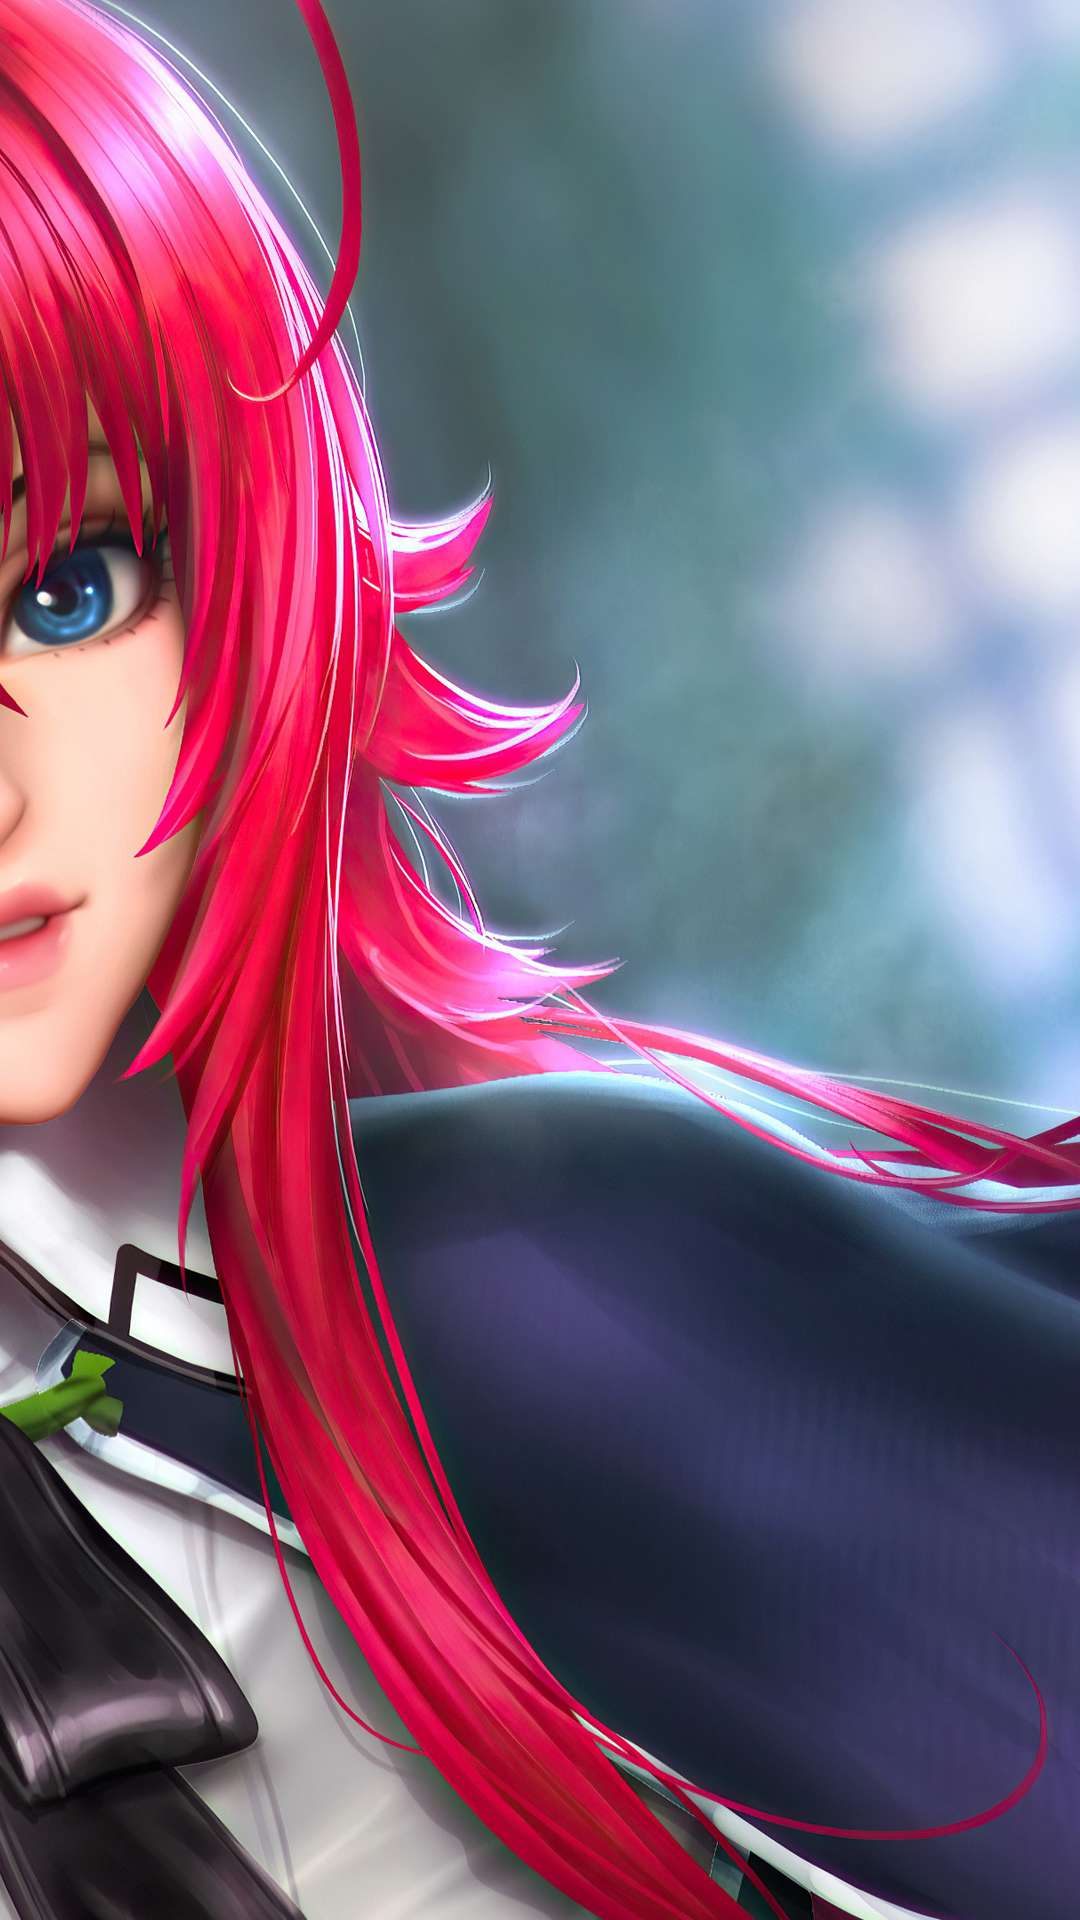 20 Rias Gremory Wallpapers for iPhone and Android by Julie Robinson